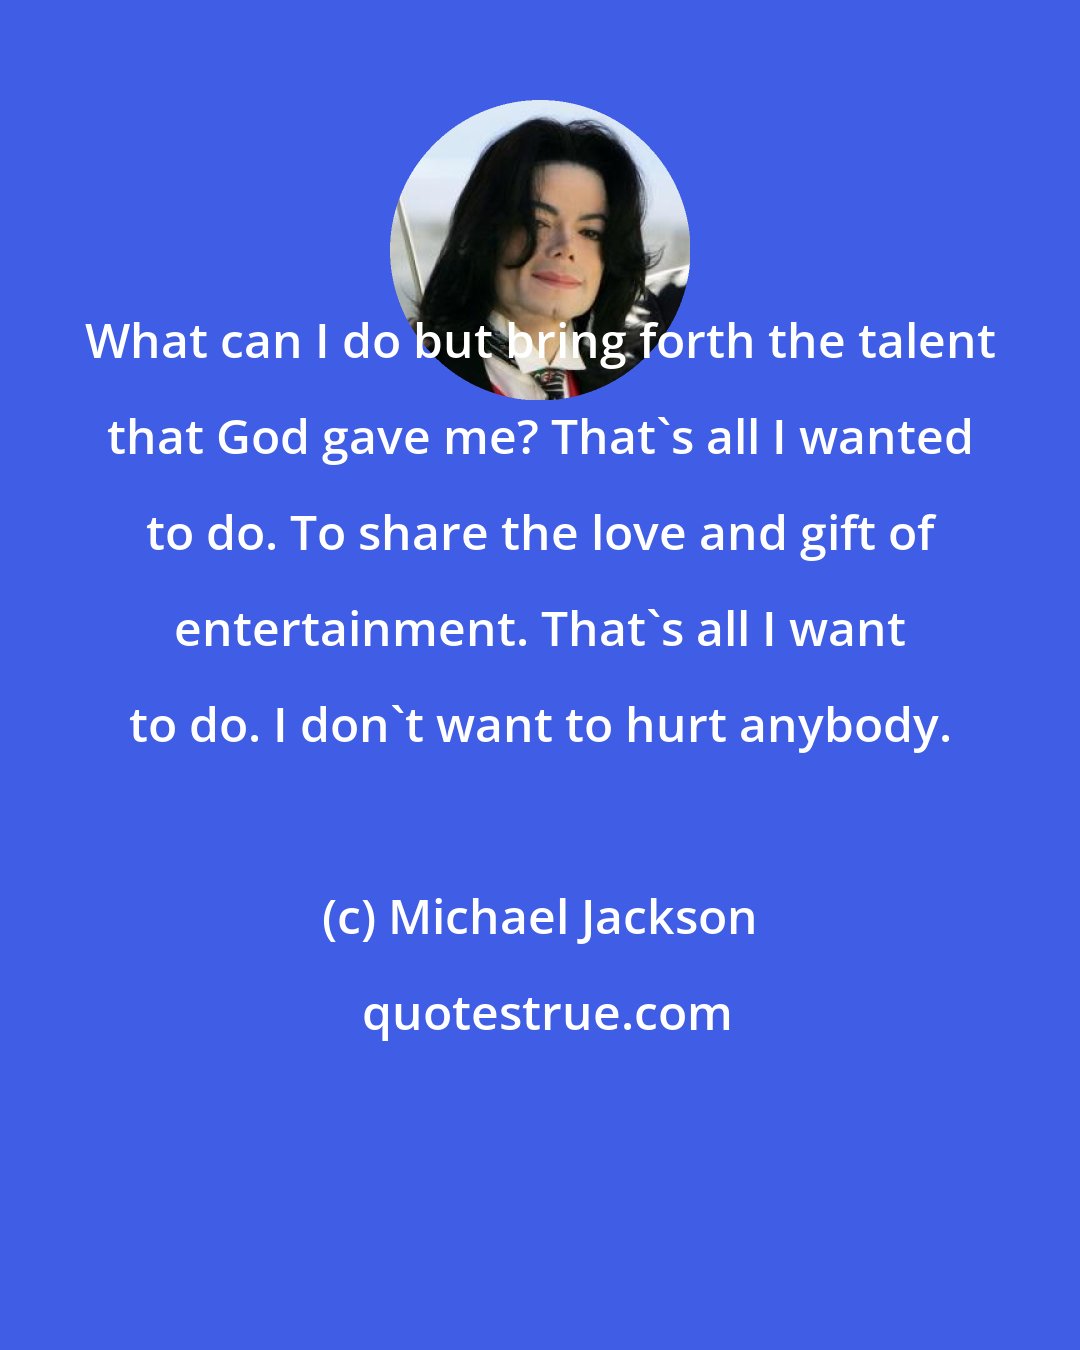 Michael Jackson: What can I do but bring forth the talent that God gave me? That's all I wanted to do. To share the love and gift of entertainment. That's all I want to do. I don't want to hurt anybody.